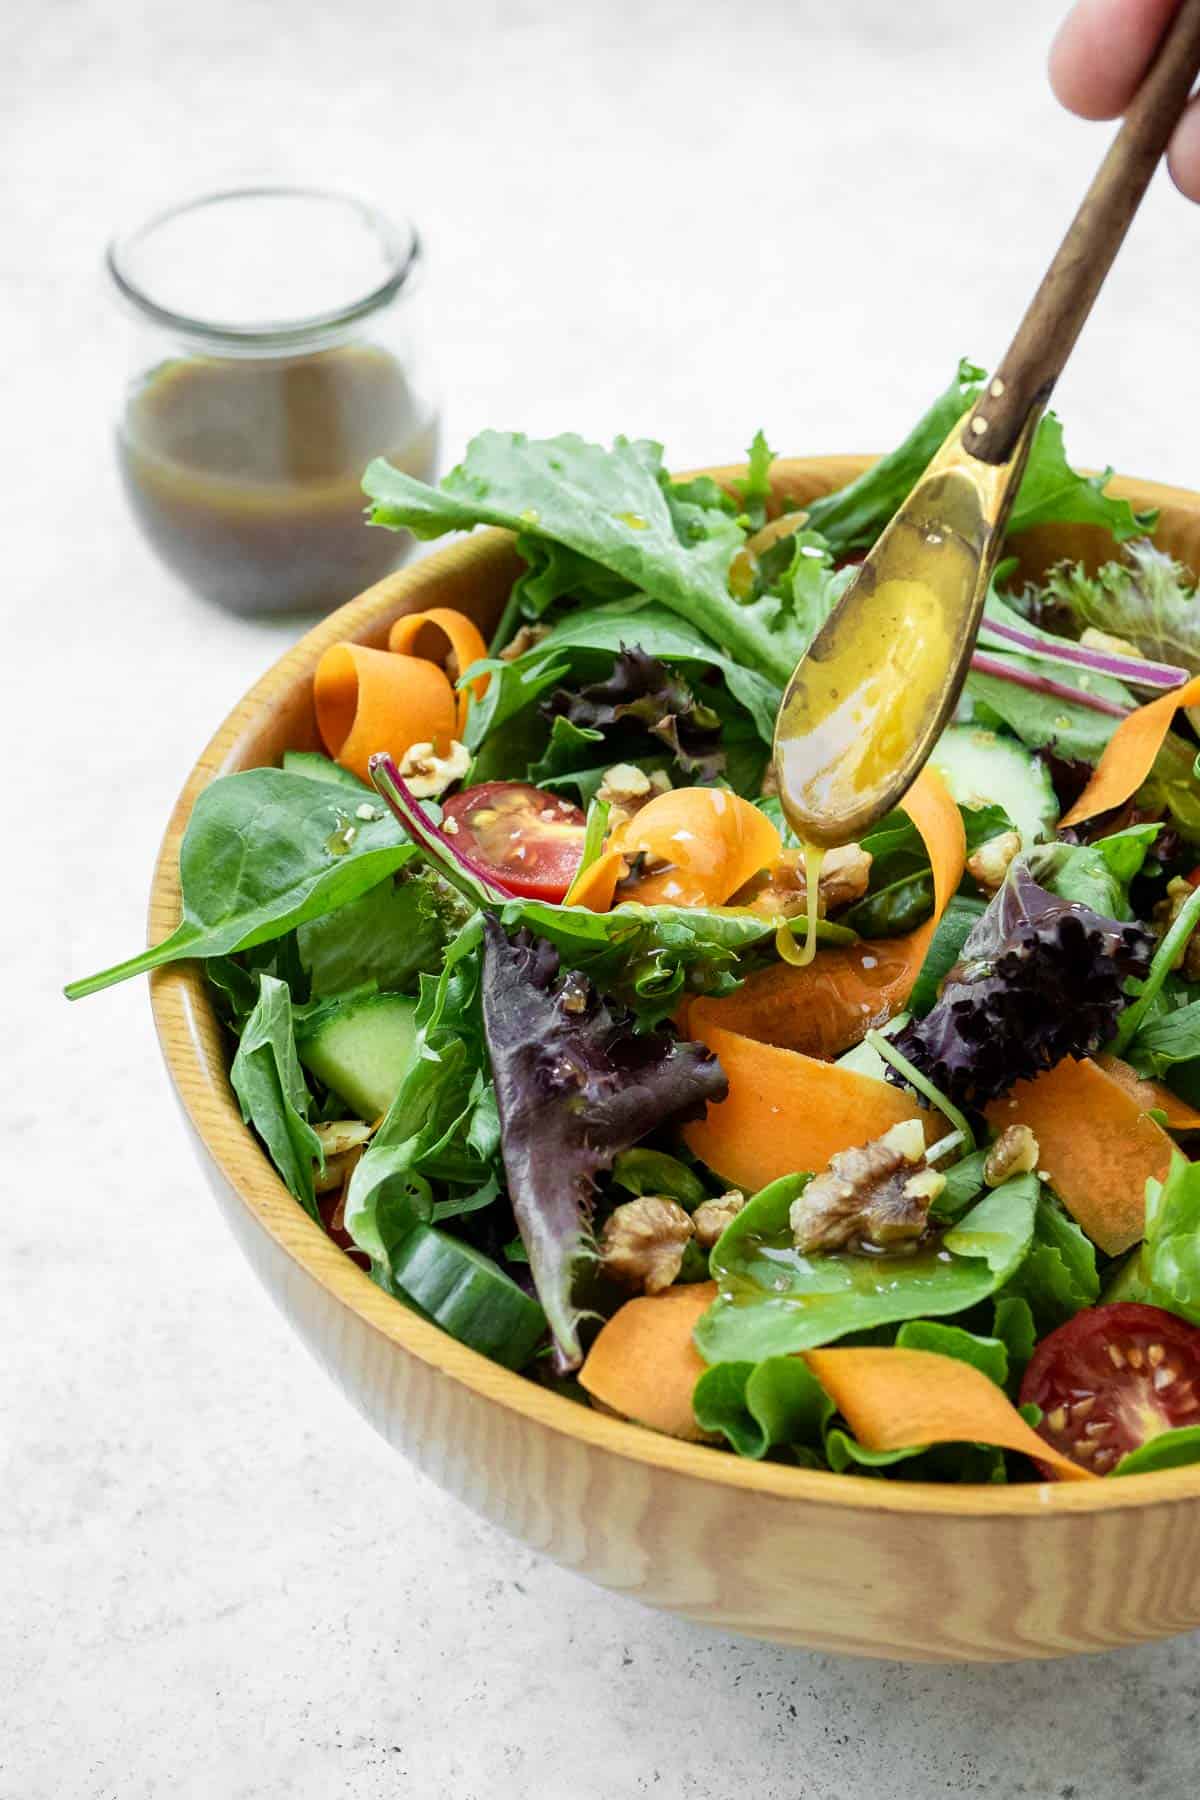 honey balsamic vinaigrette being drizzled from a small serving spoon onto a salad in a bowl.